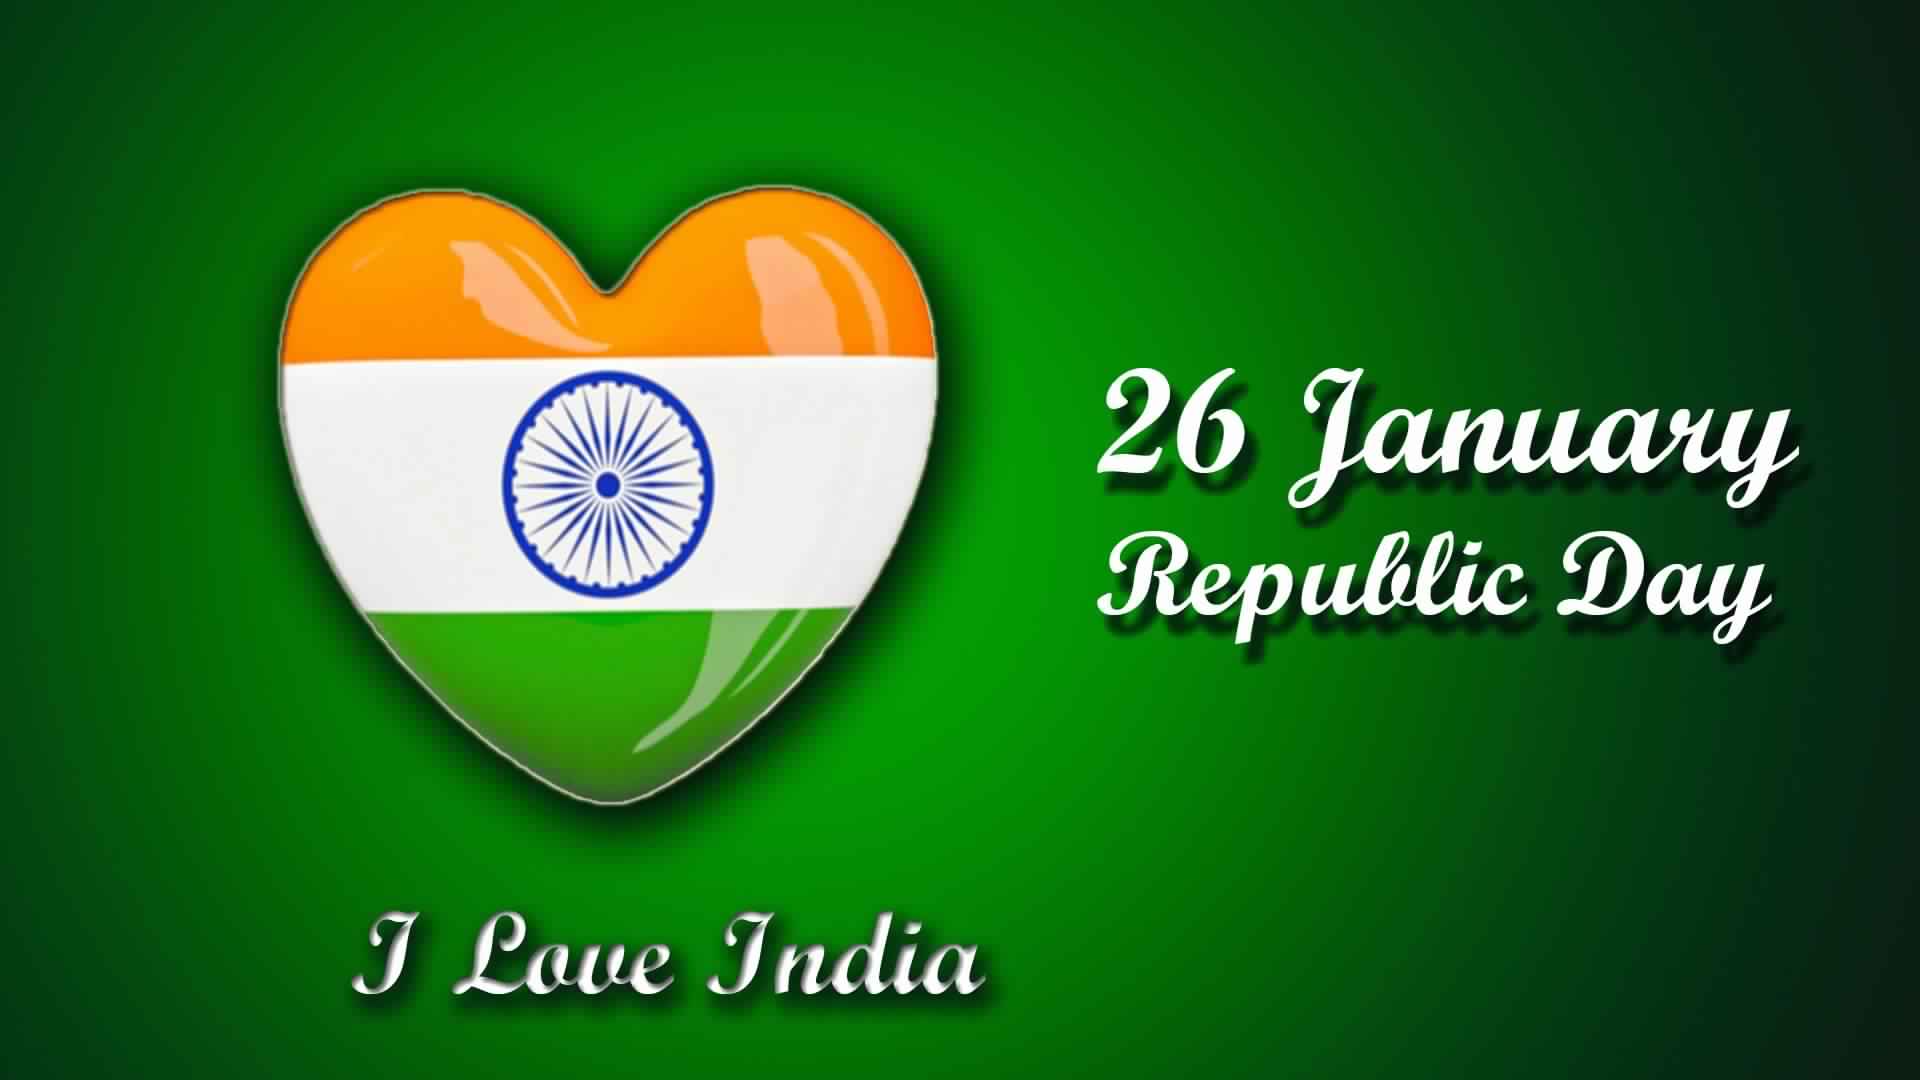 Best Happy Republic Day Wallpapers 2020 Download - Happy Republic Day 2020 Images Download - HD Wallpaper 